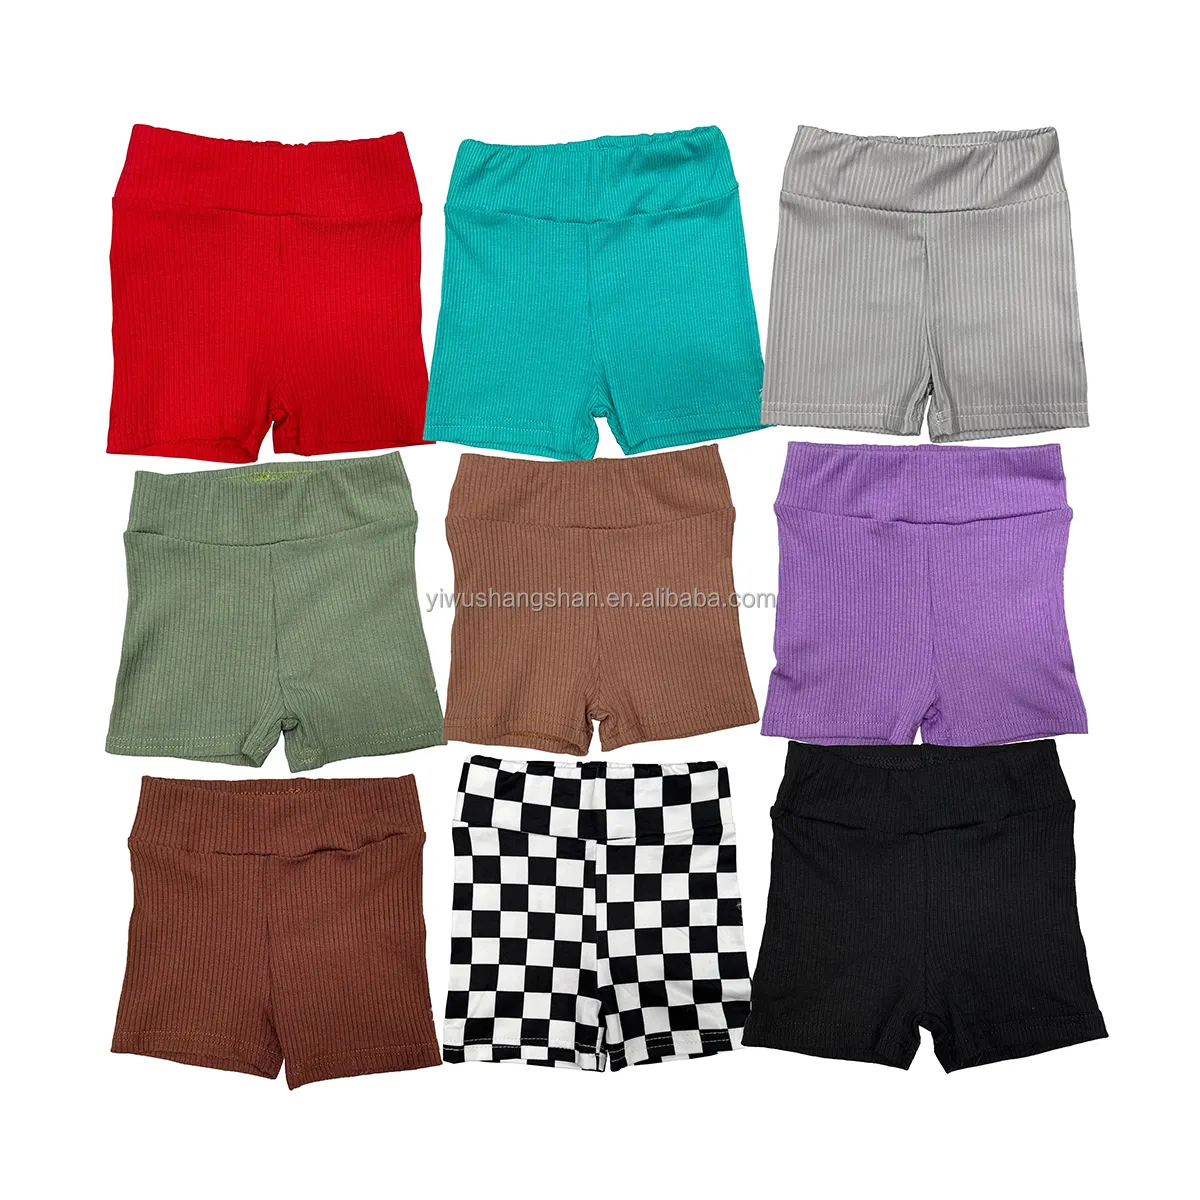 High Quality Wholesale Mix Solid Color Children Short Leggings Ribbed Fabric Baby Girls Biker Shorts